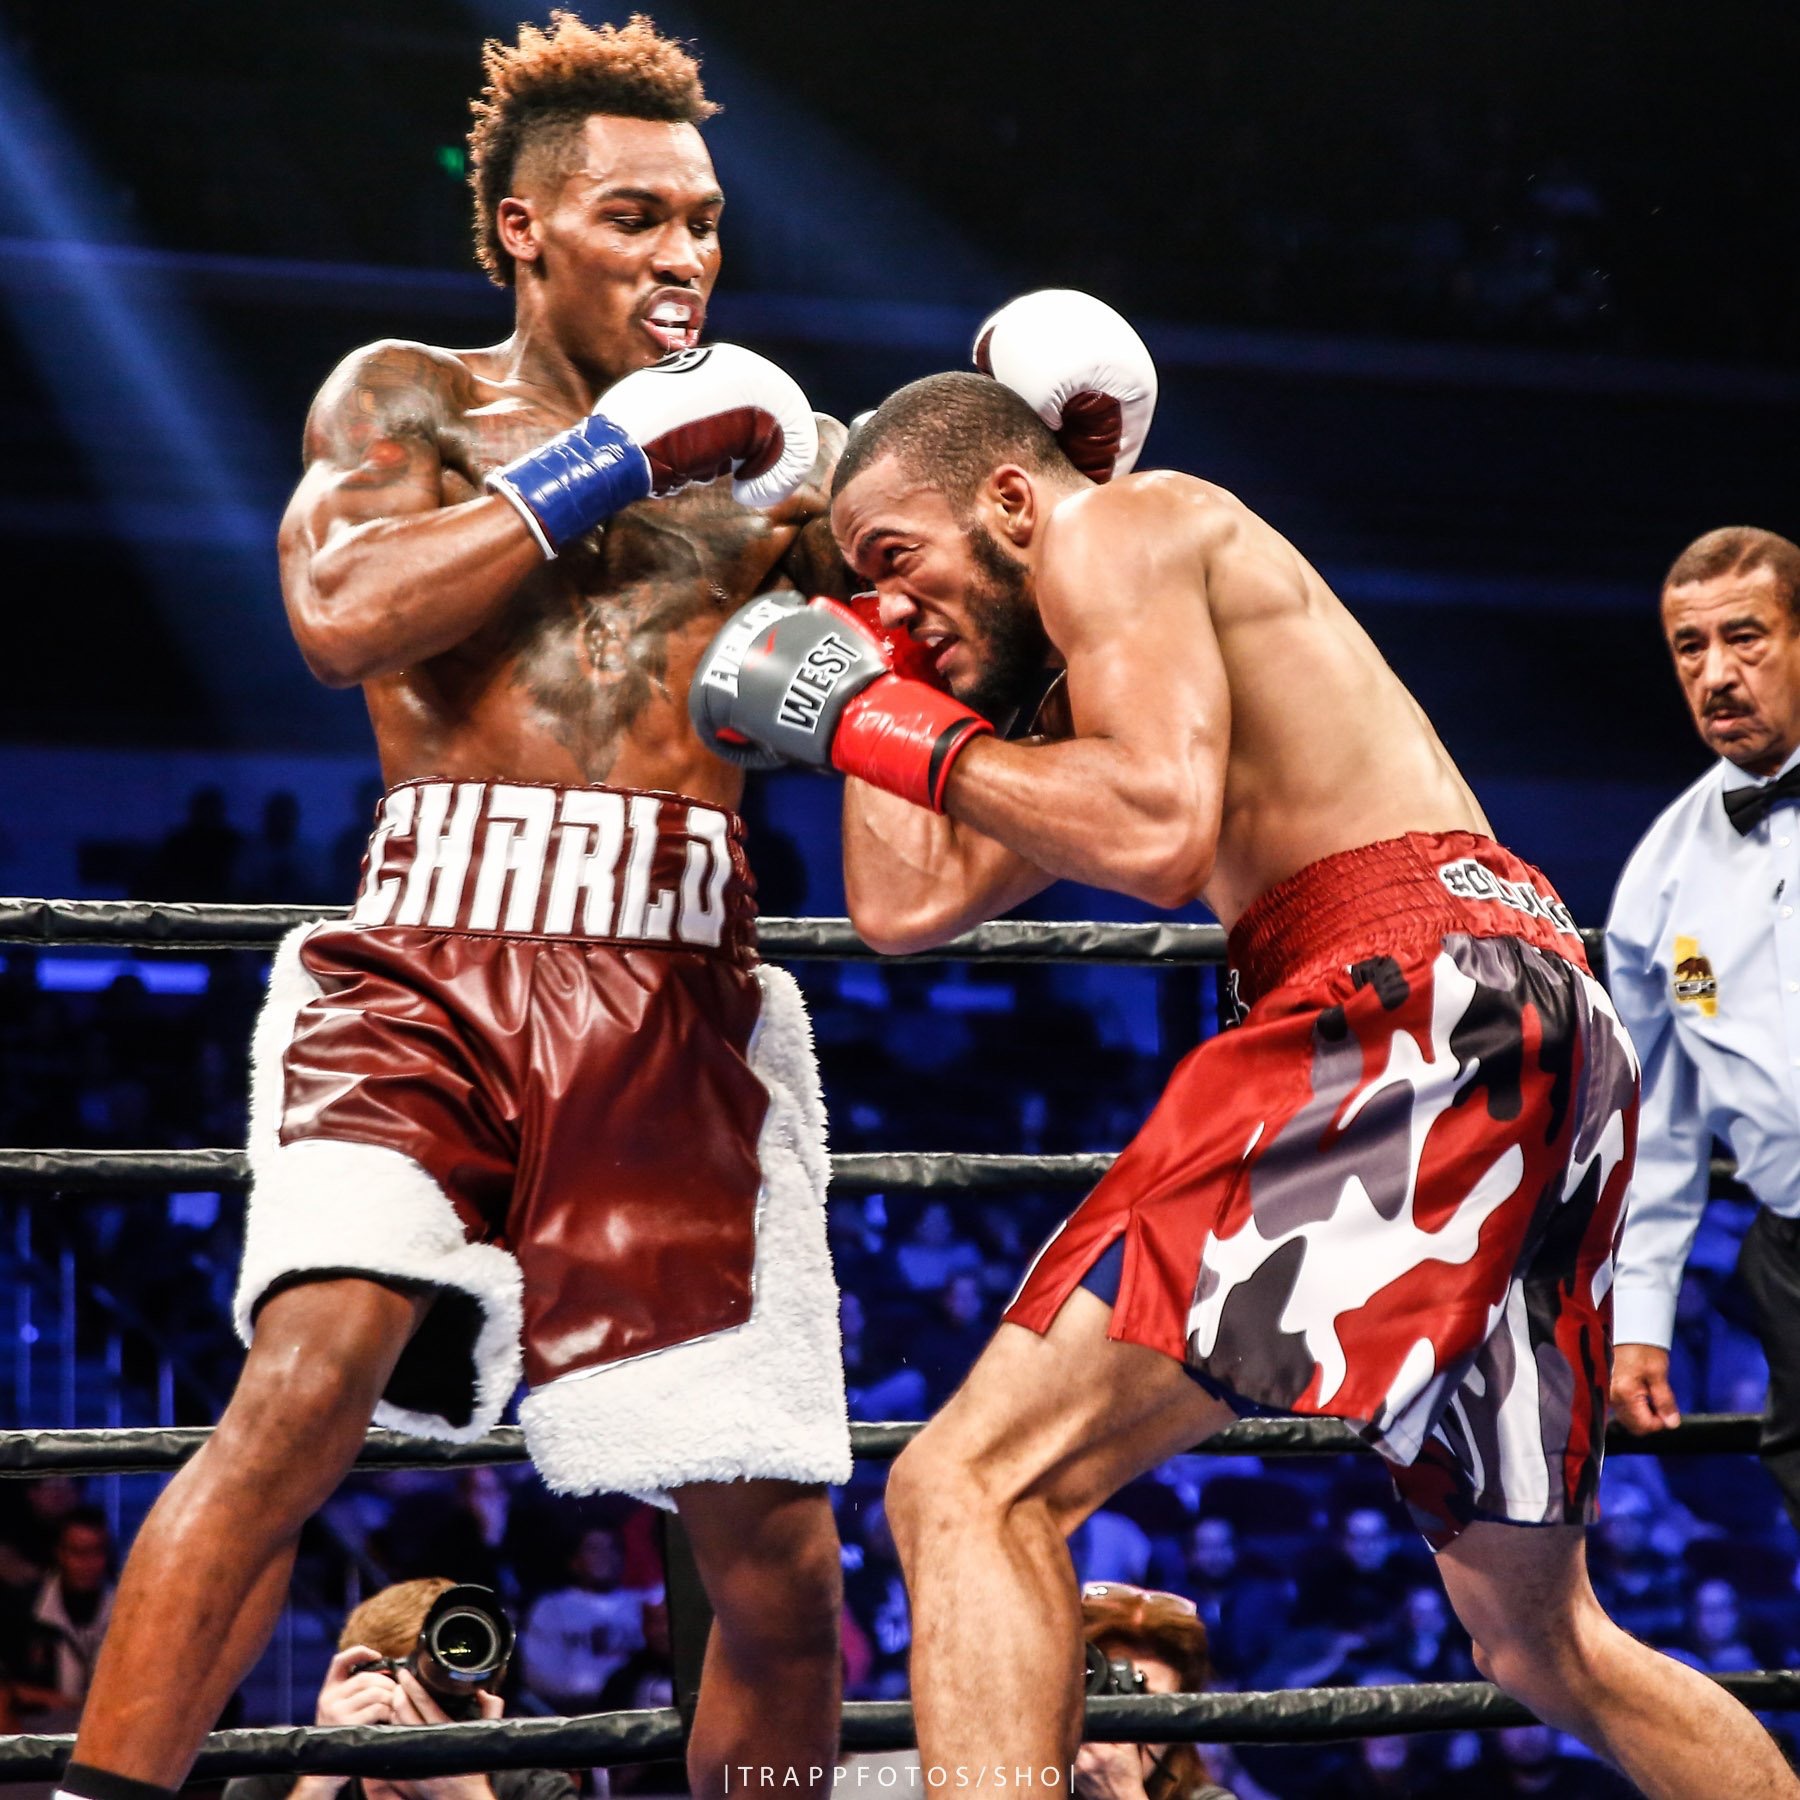 Mares Impresses, Charlo Destroys In Satisfying Showtime Card